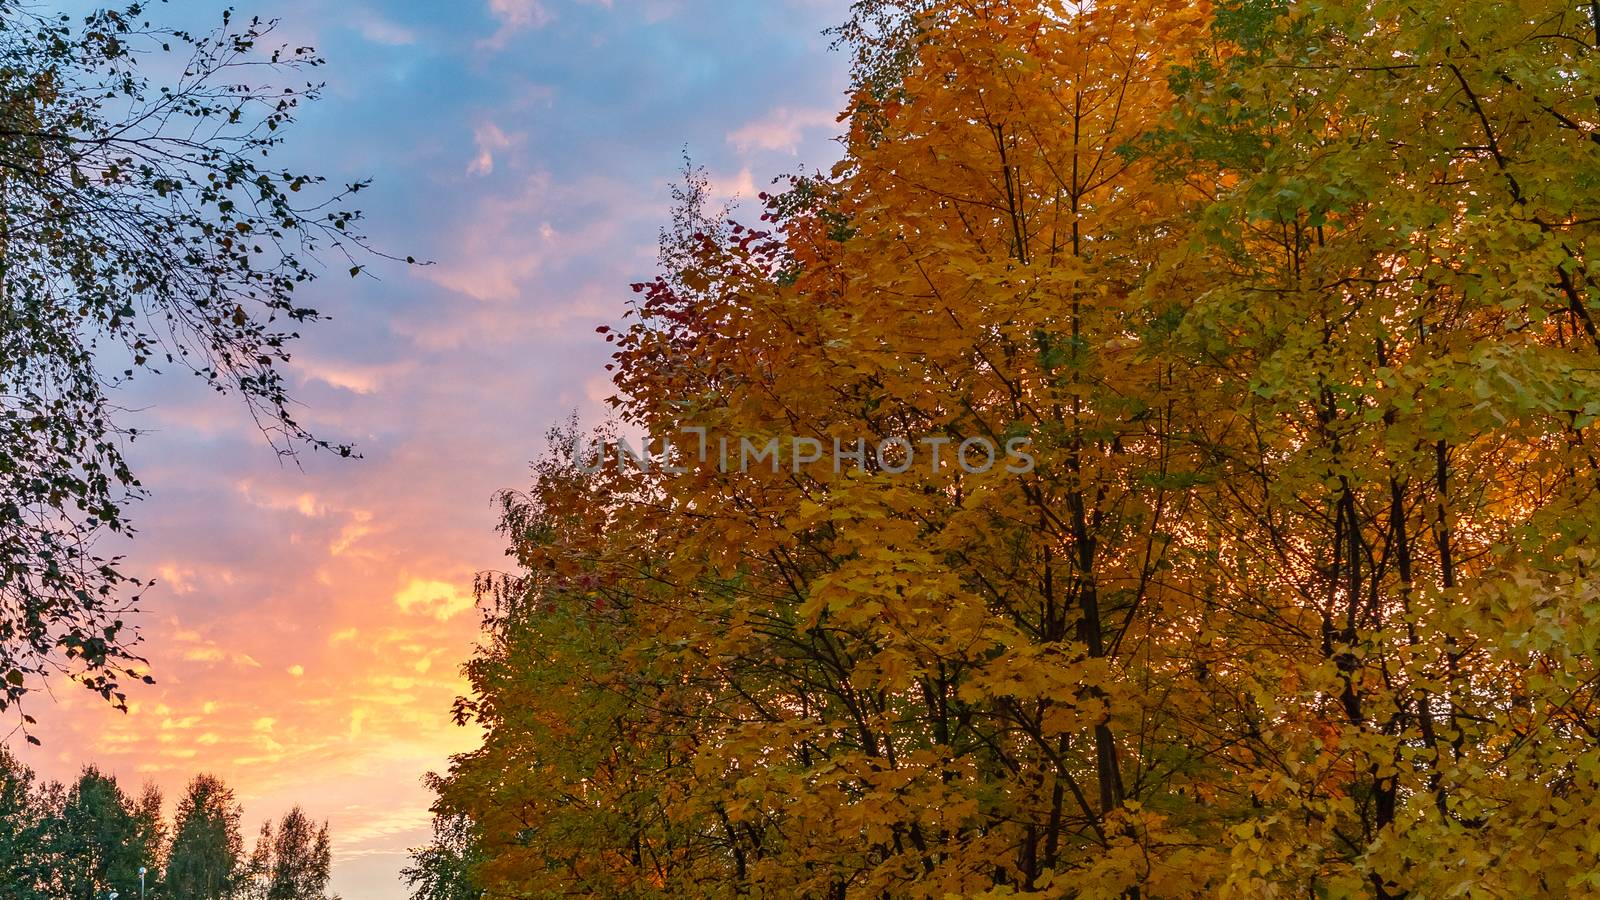 Autumn treetops against a cloudy sky at sunset. Background by galsand